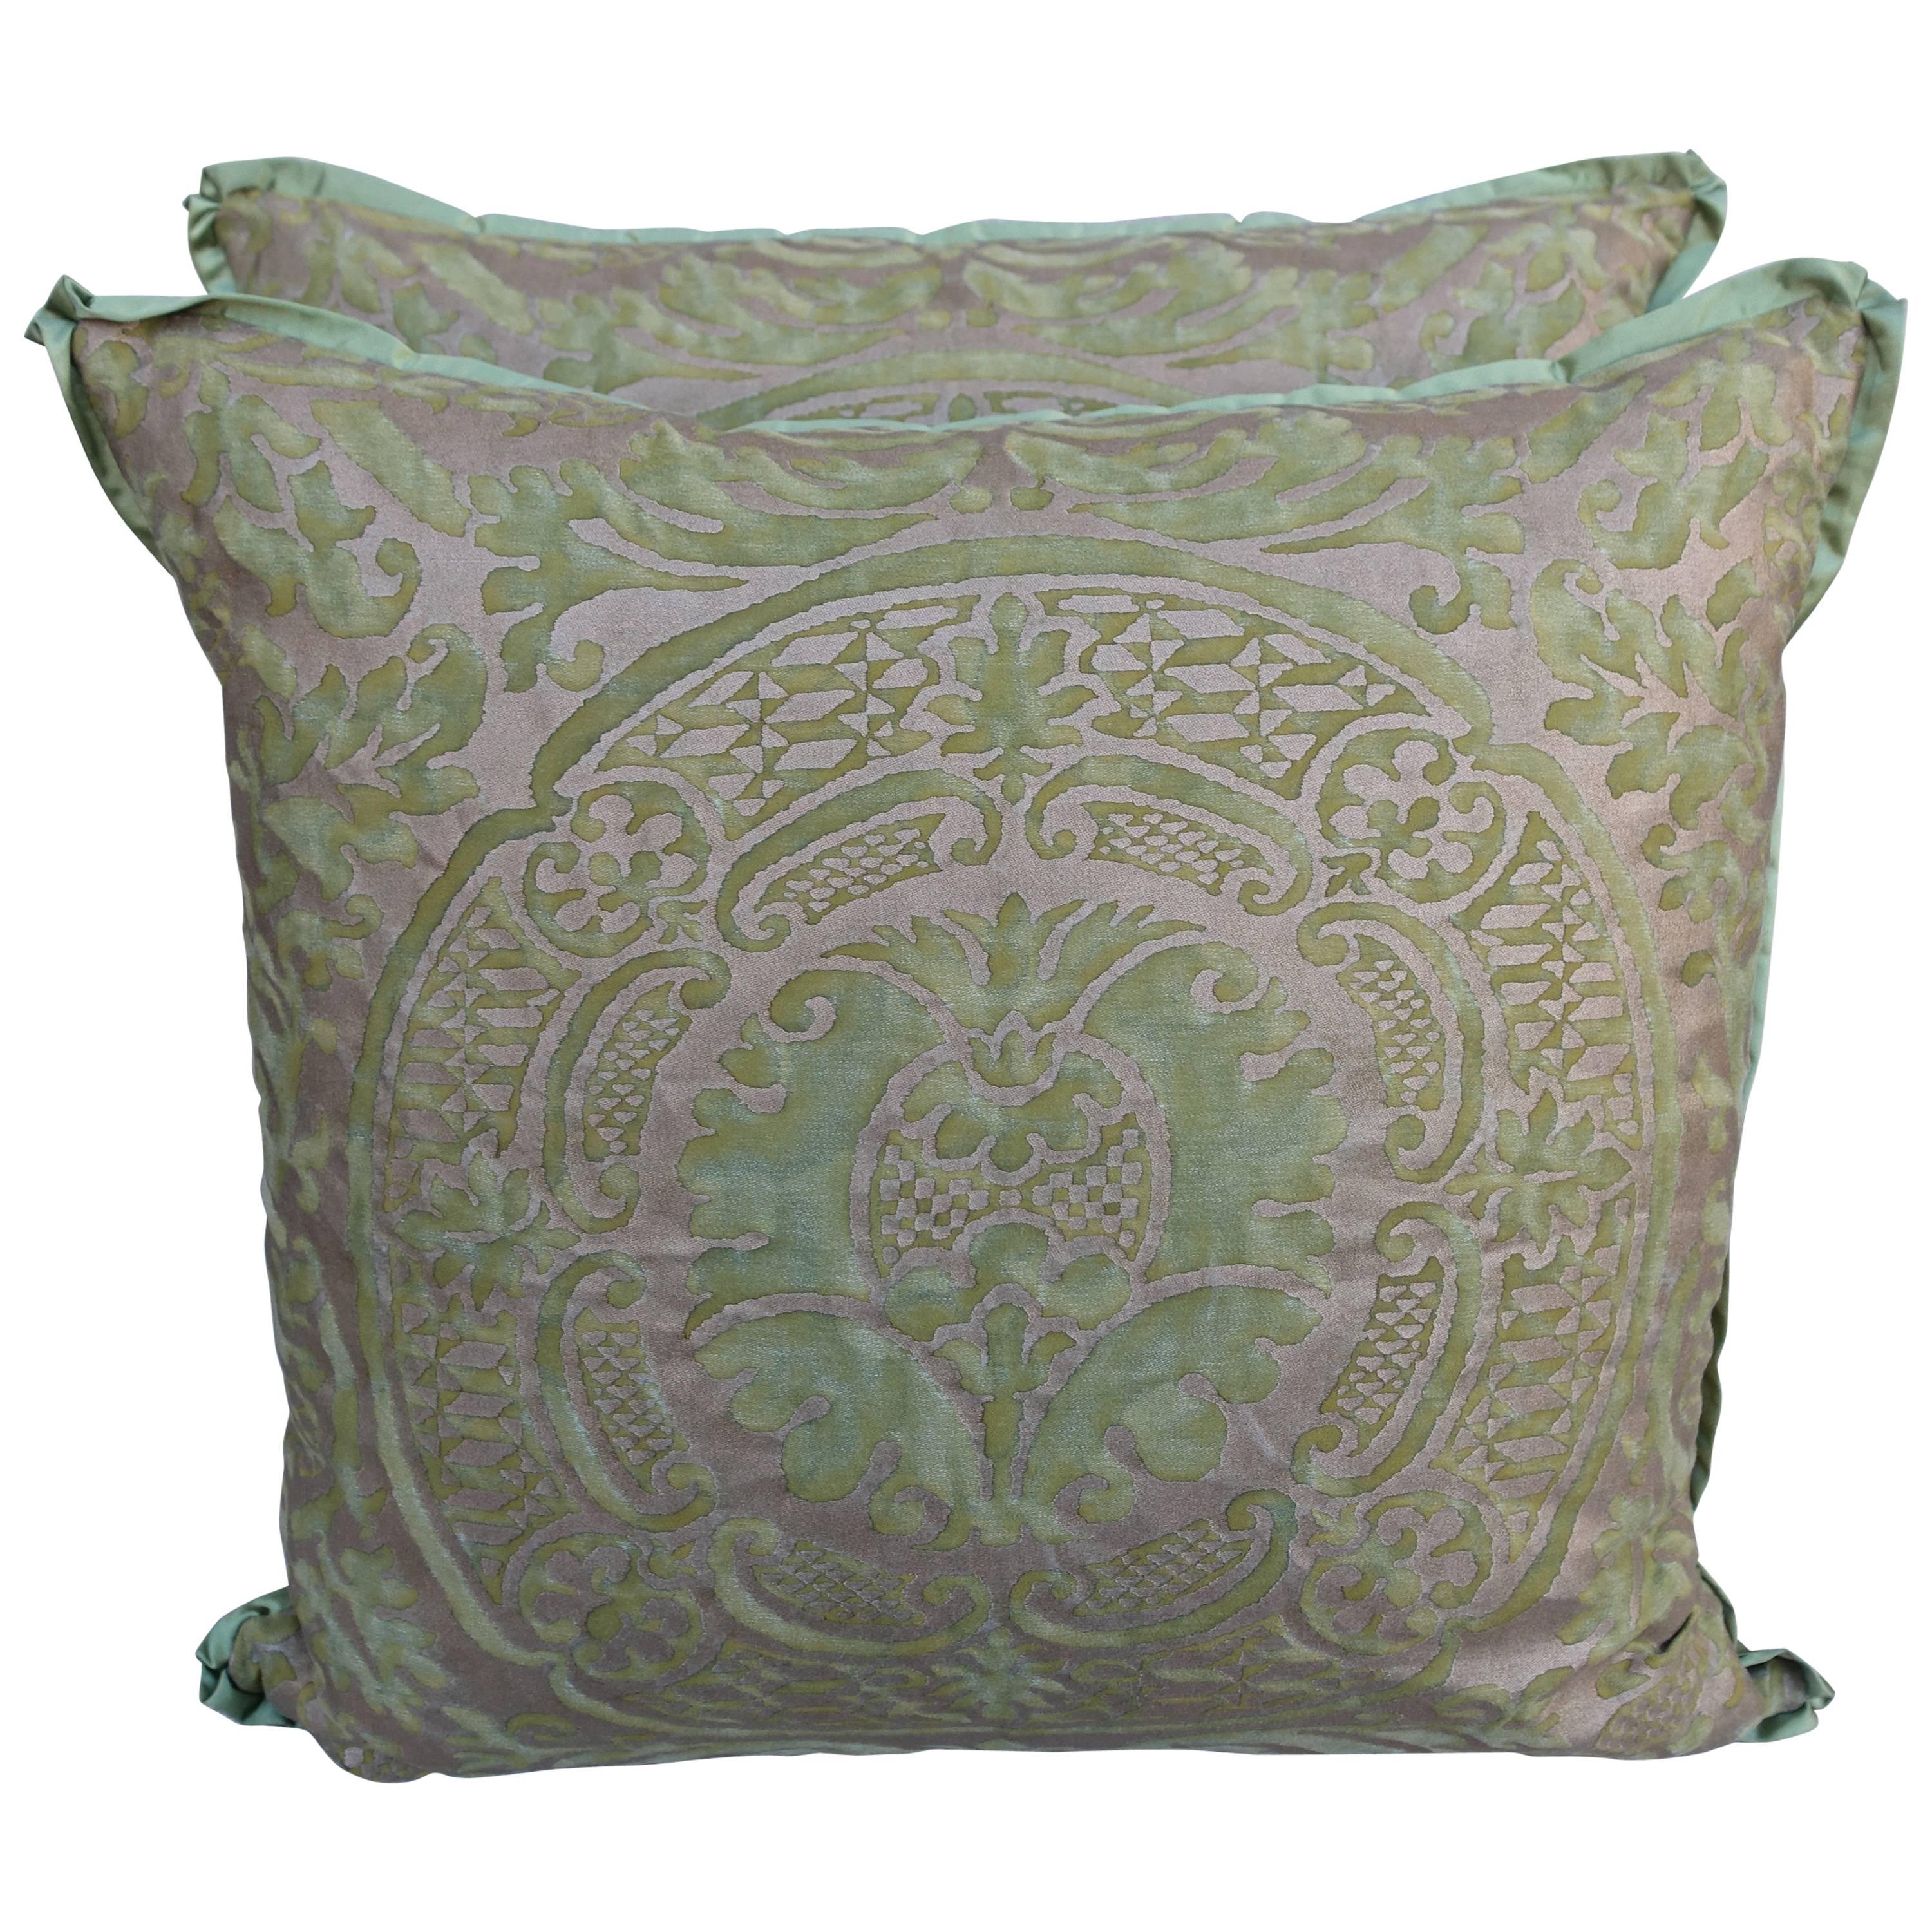 Orsini Patterned Green and Gold Fortuny Pillows